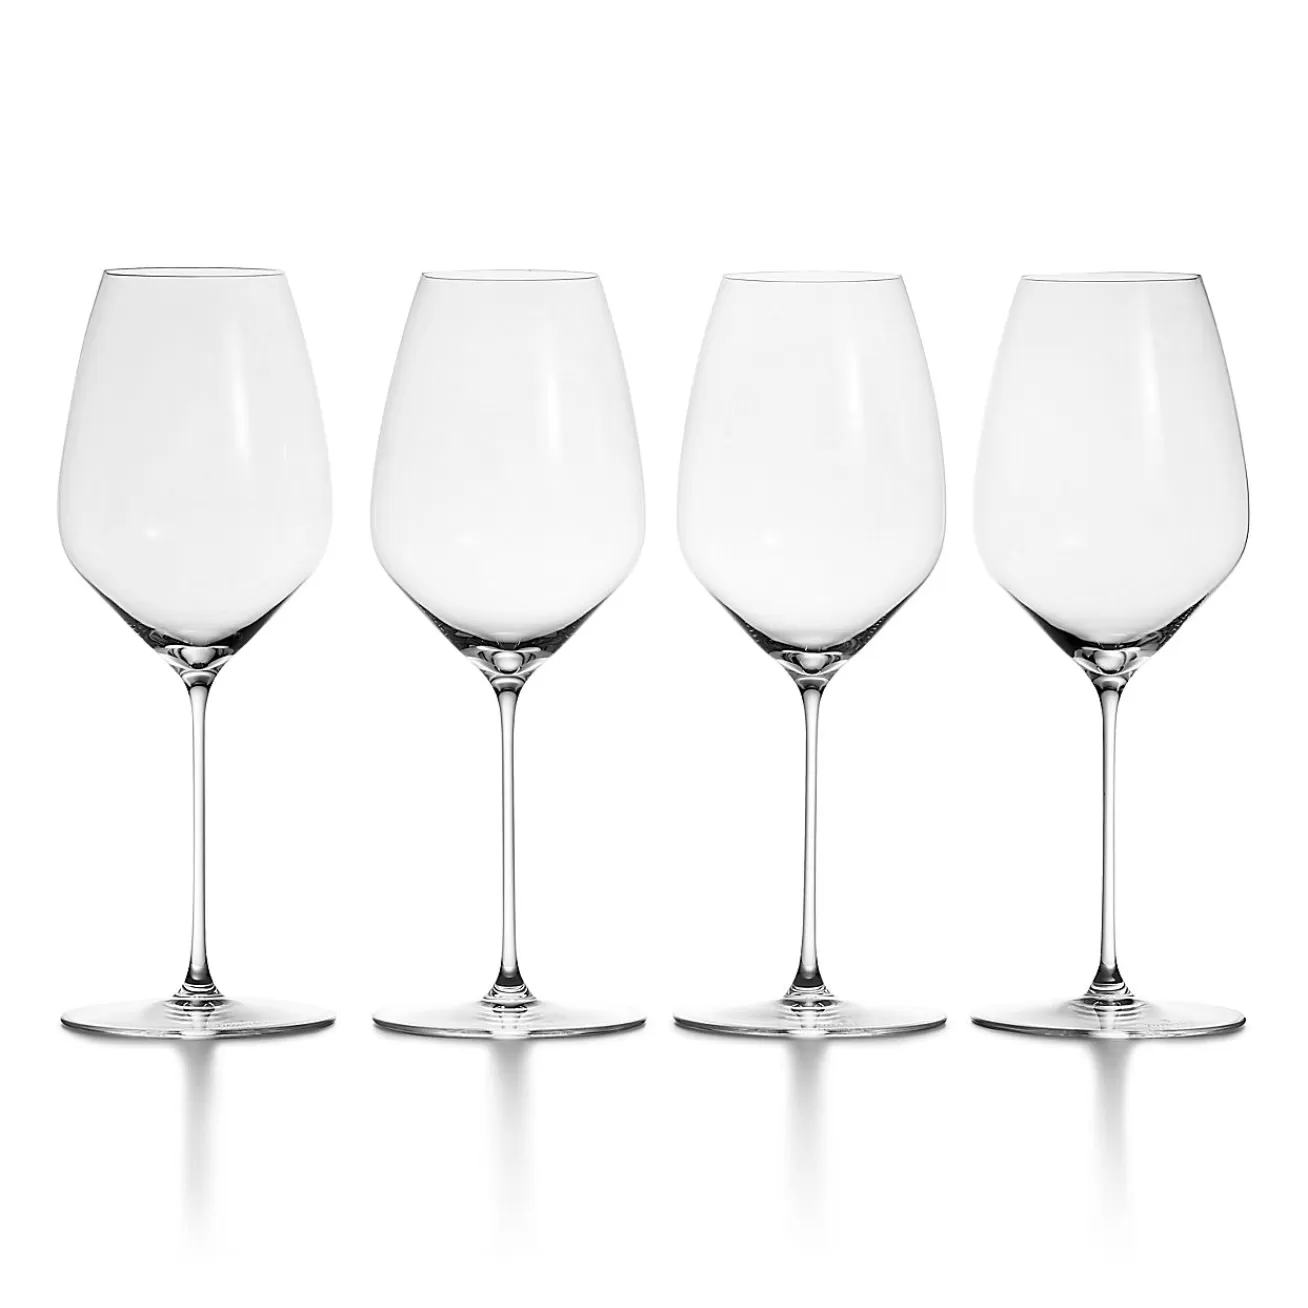 Tiffany & Co. Tiffany Connoisseur Riesling Wine Glass in Crystal Glass, Set of Four | ^ The Home | Housewarming Gifts